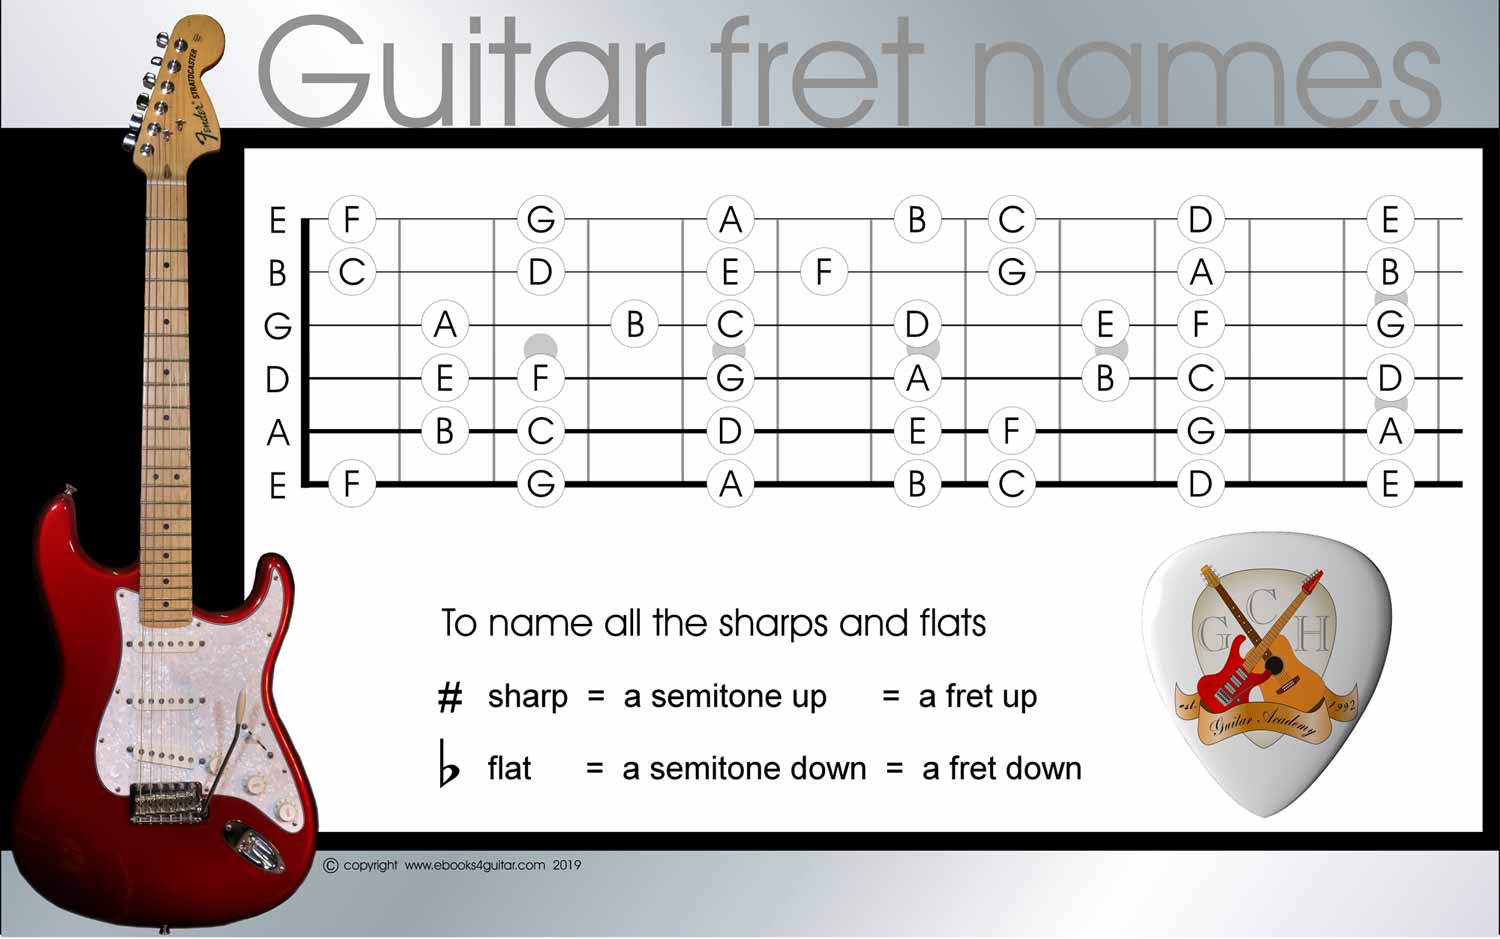 Learn to name all the frets on the guitar in easy steps, memorize the